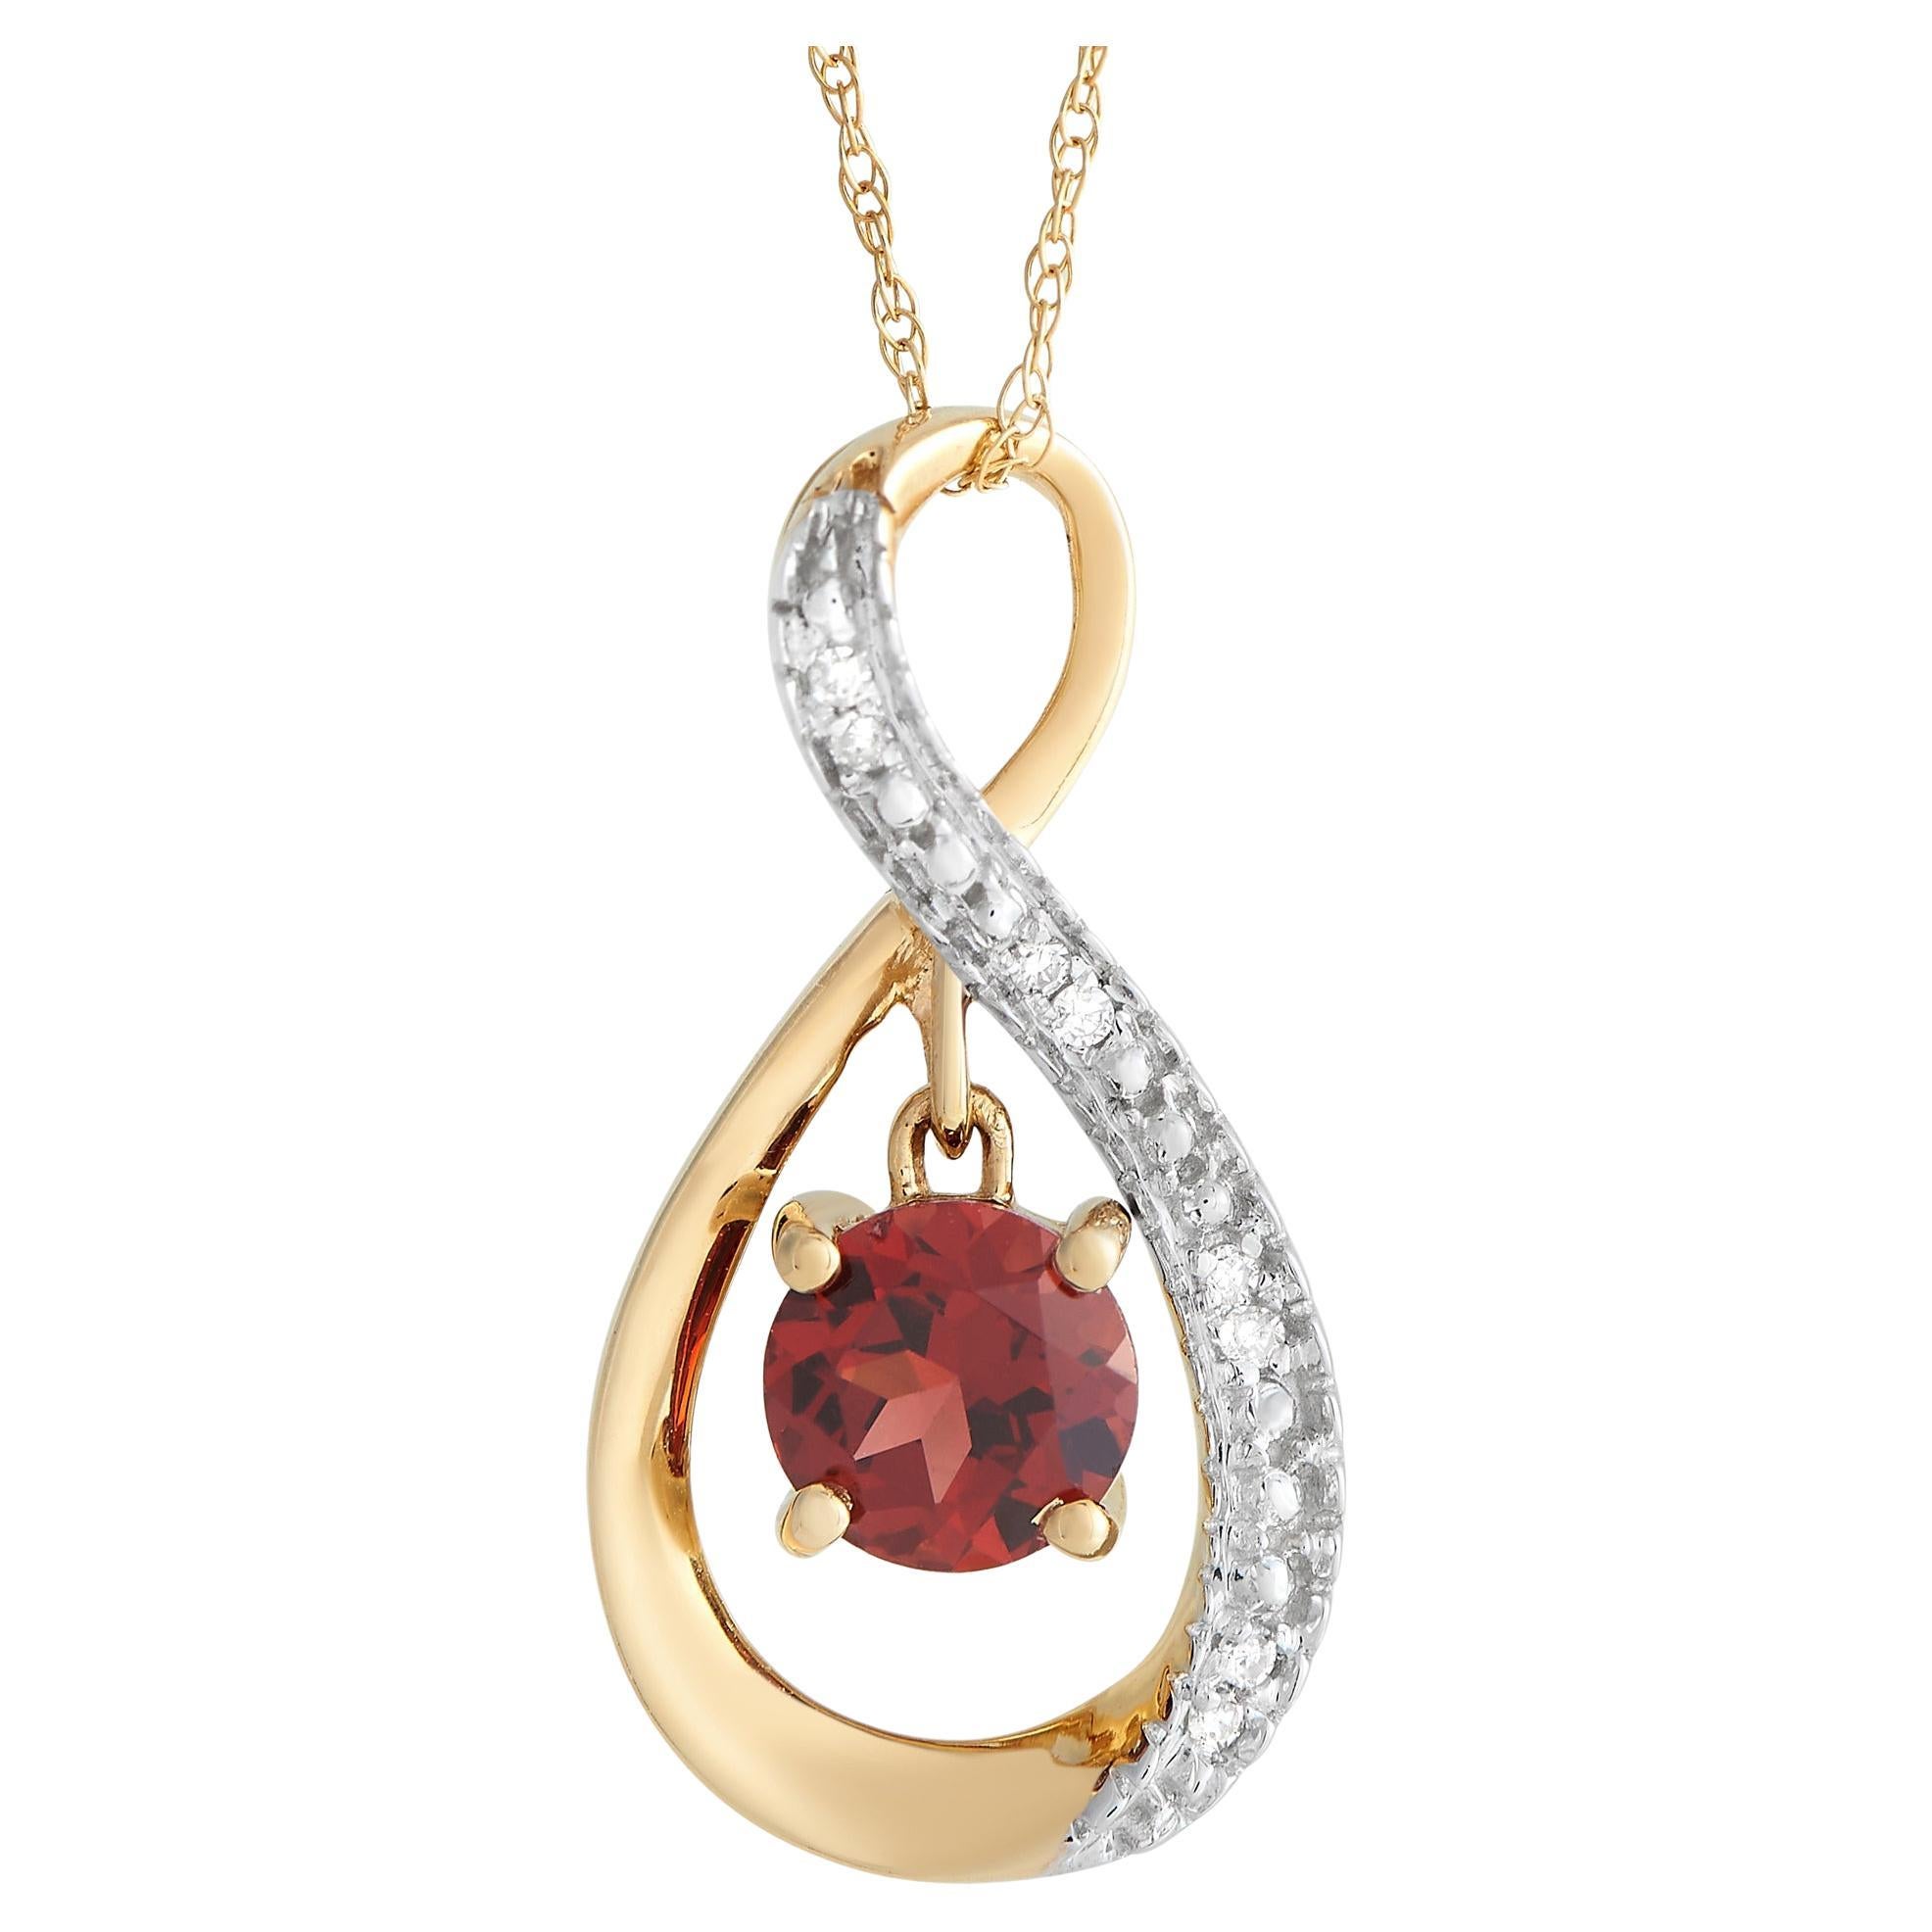 LB Exclusive 14K Yellow Gold 0.03ct Diamond and 0.03 Garnet Necklace For Sale